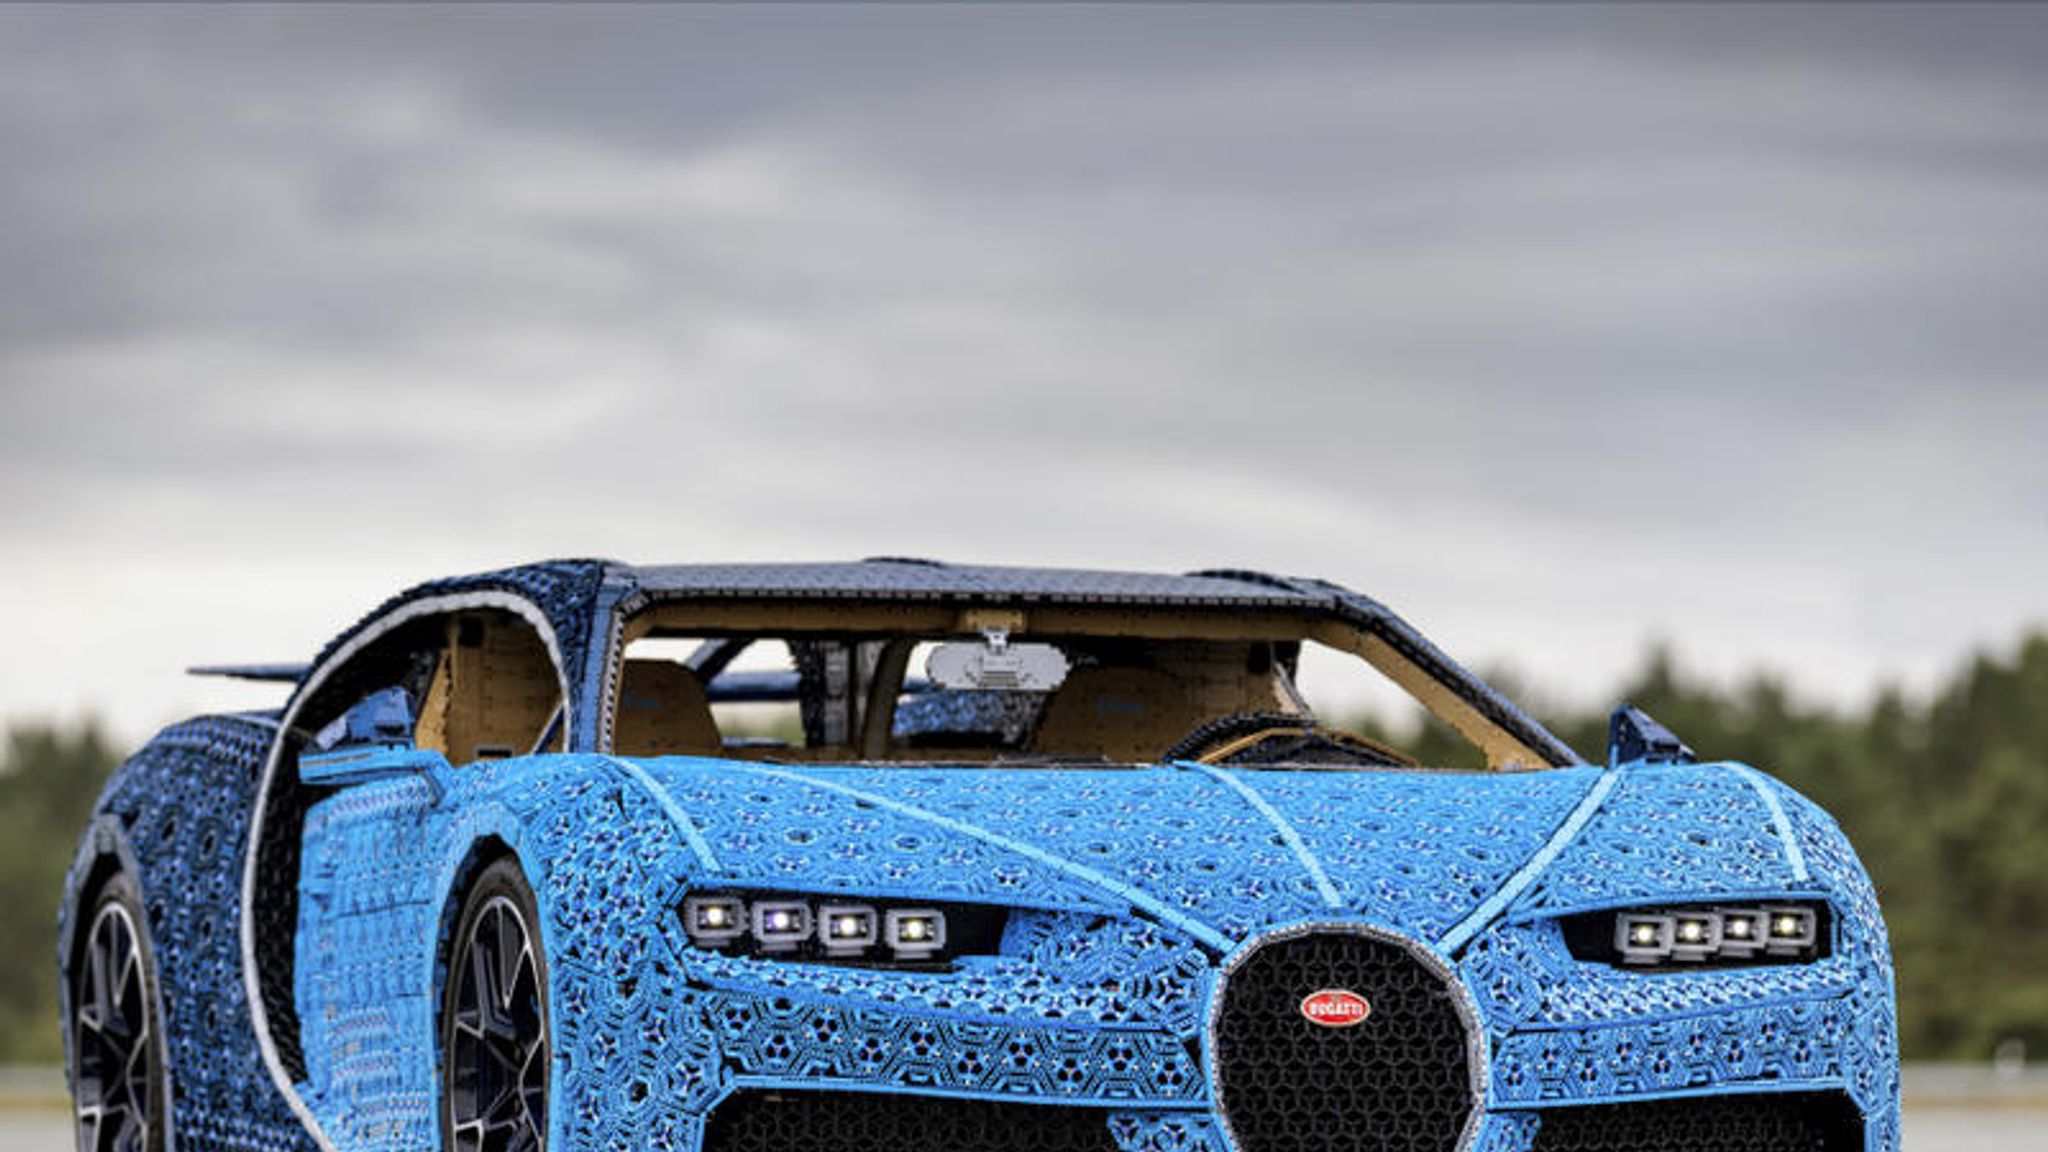 Finally completed the LEGO TECHNIC Bugatti Chiron build. What an  experience, by far the most truly technical, crazily in-depth, LEGO set I  have ever completed. Took my time and enjoyed the build